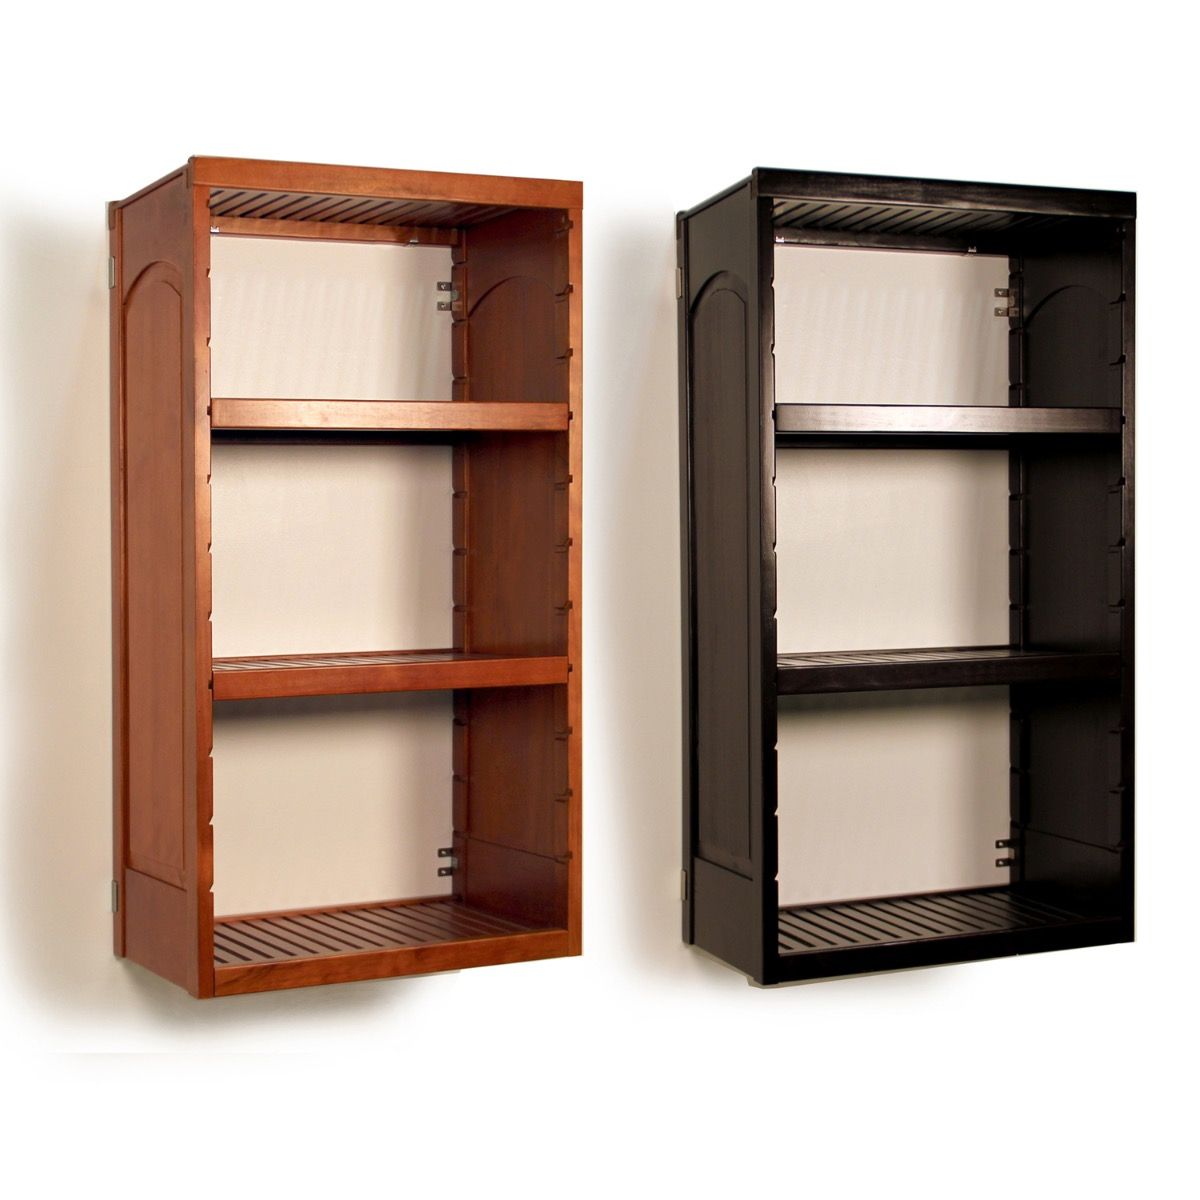 16in. Deep Woodcrest Tower with shelves | John Louis Home